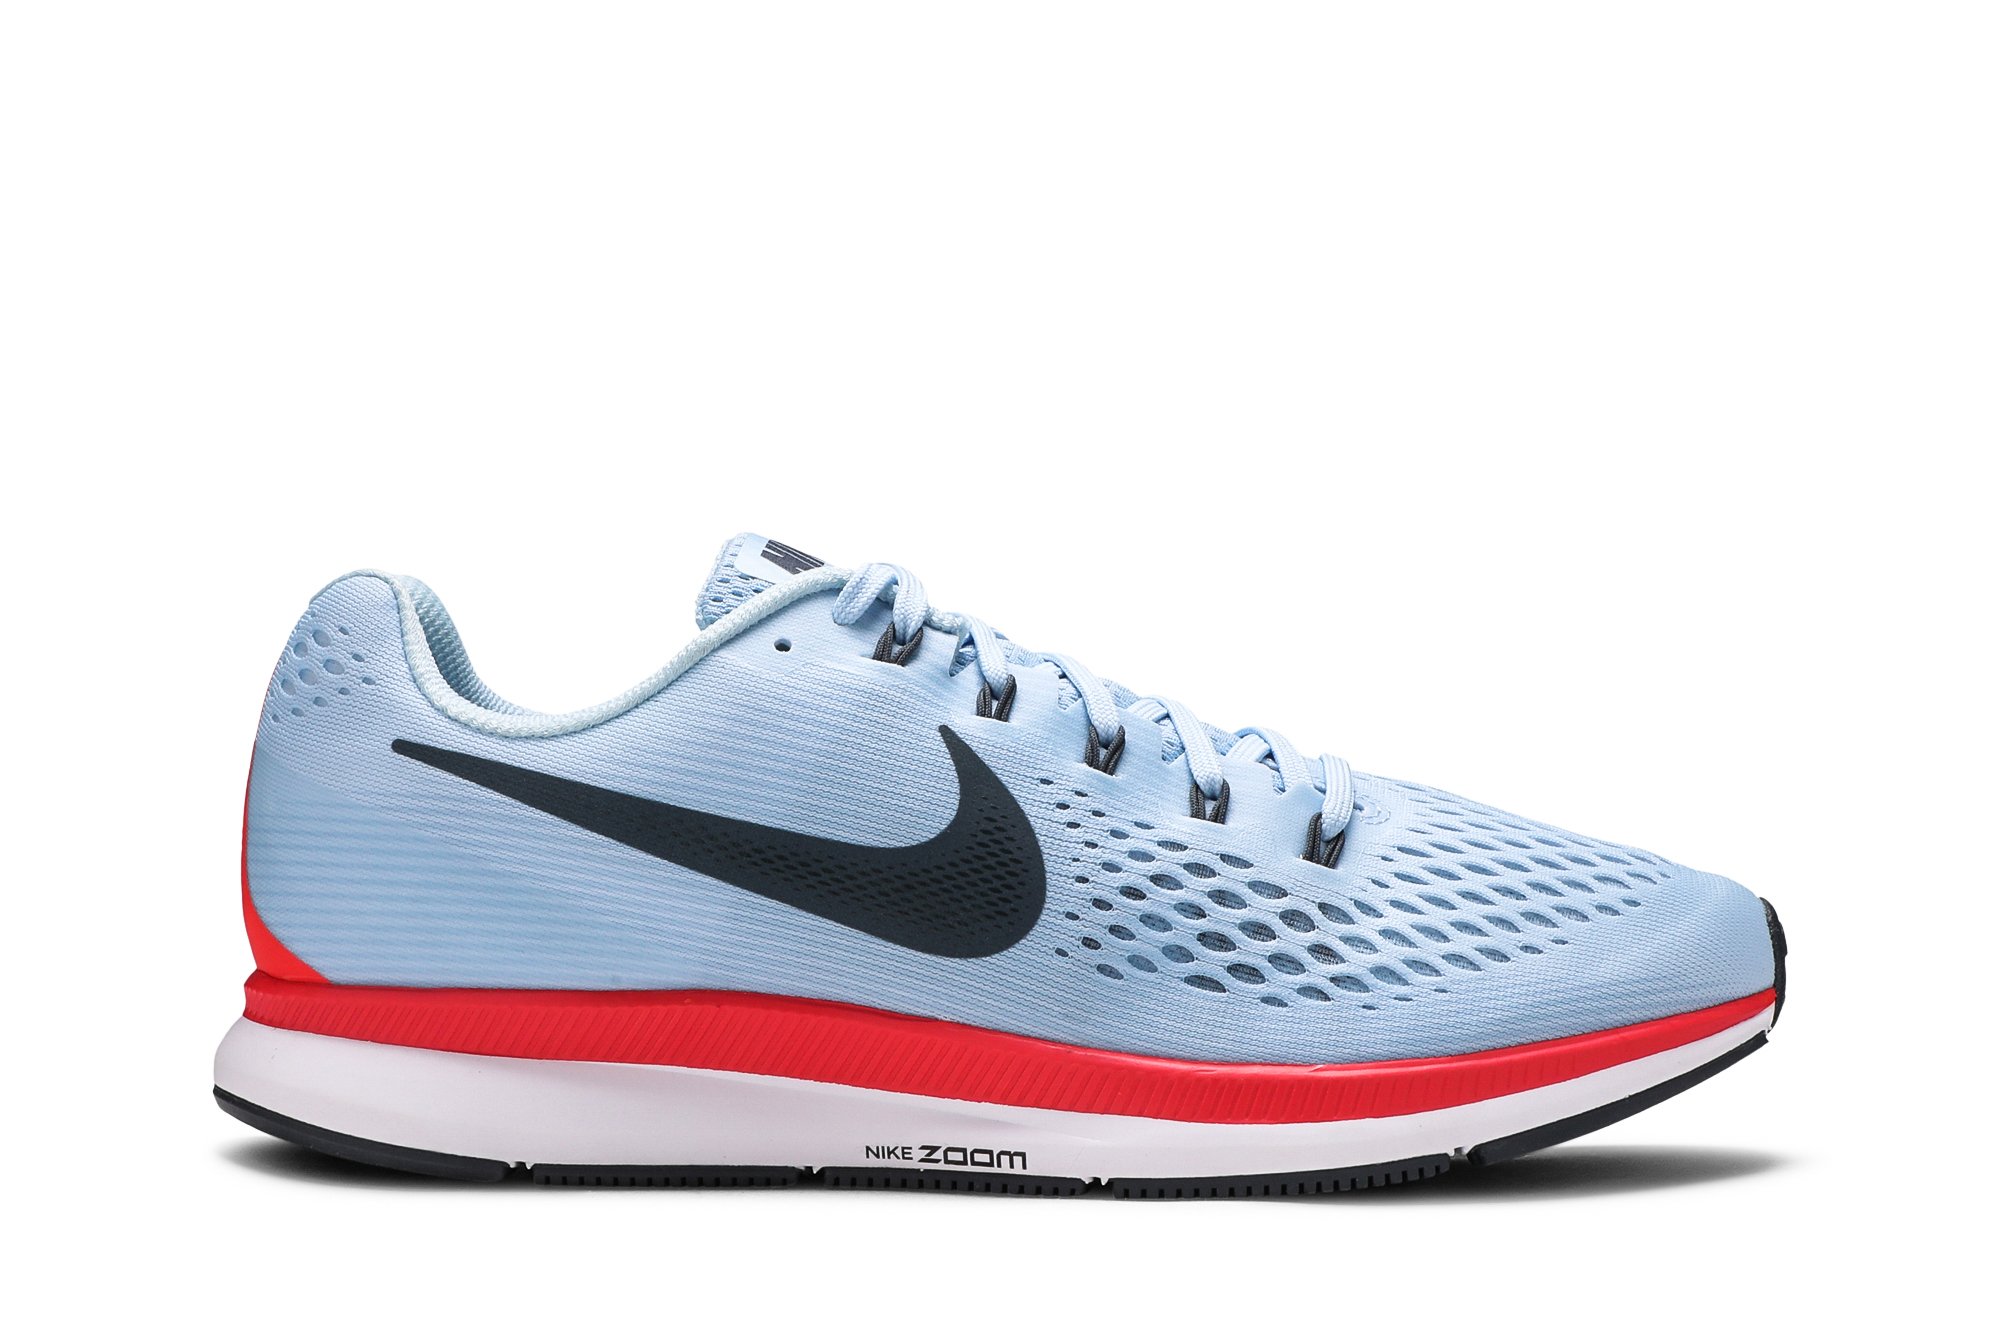 Nike Air Zoom Pegasus 34 Ice Blue Sale Online, SAVE 46% thecocktail-clinic.com